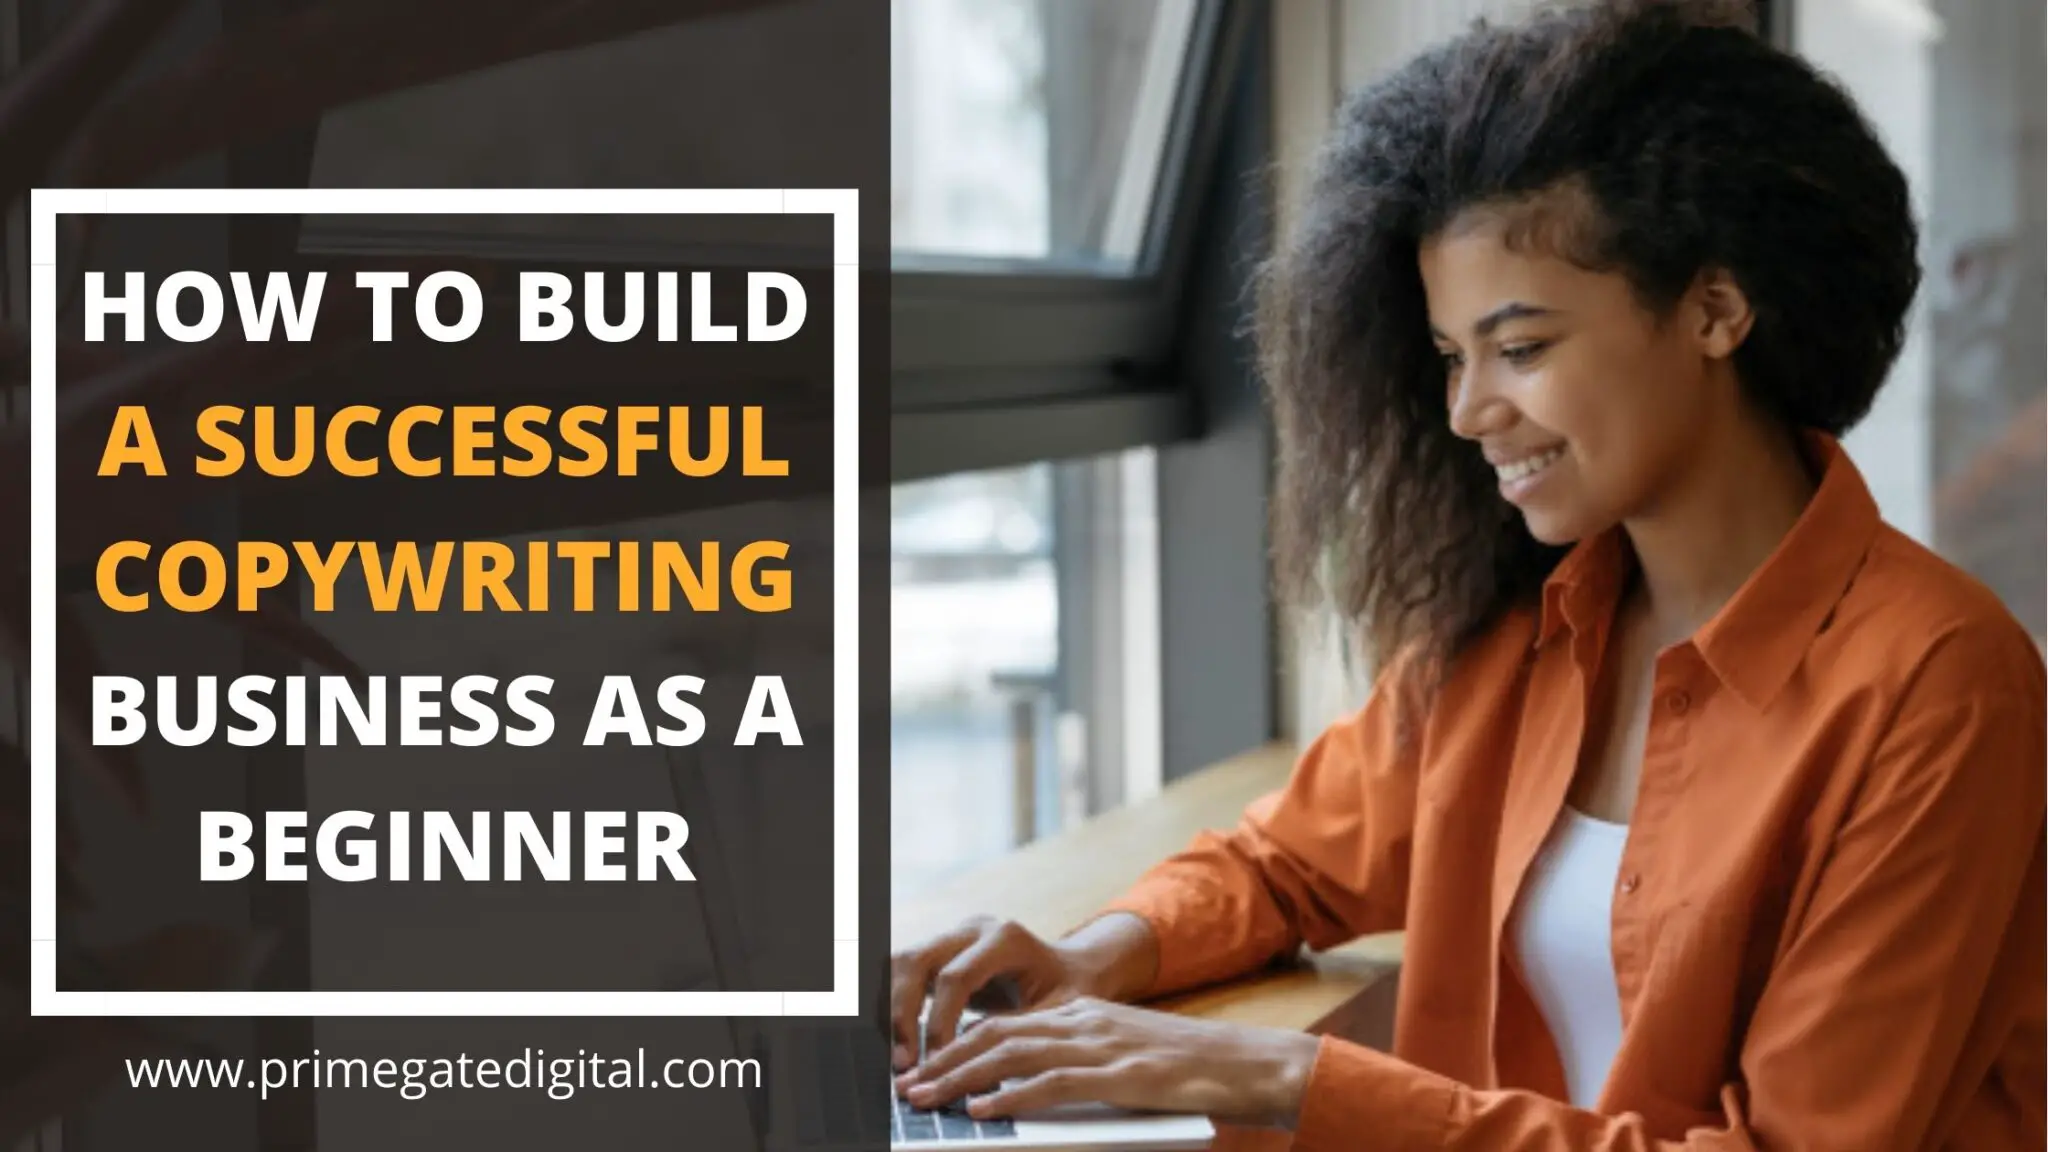 How to Build a Successful Copywriting Business (Quick & Easy)